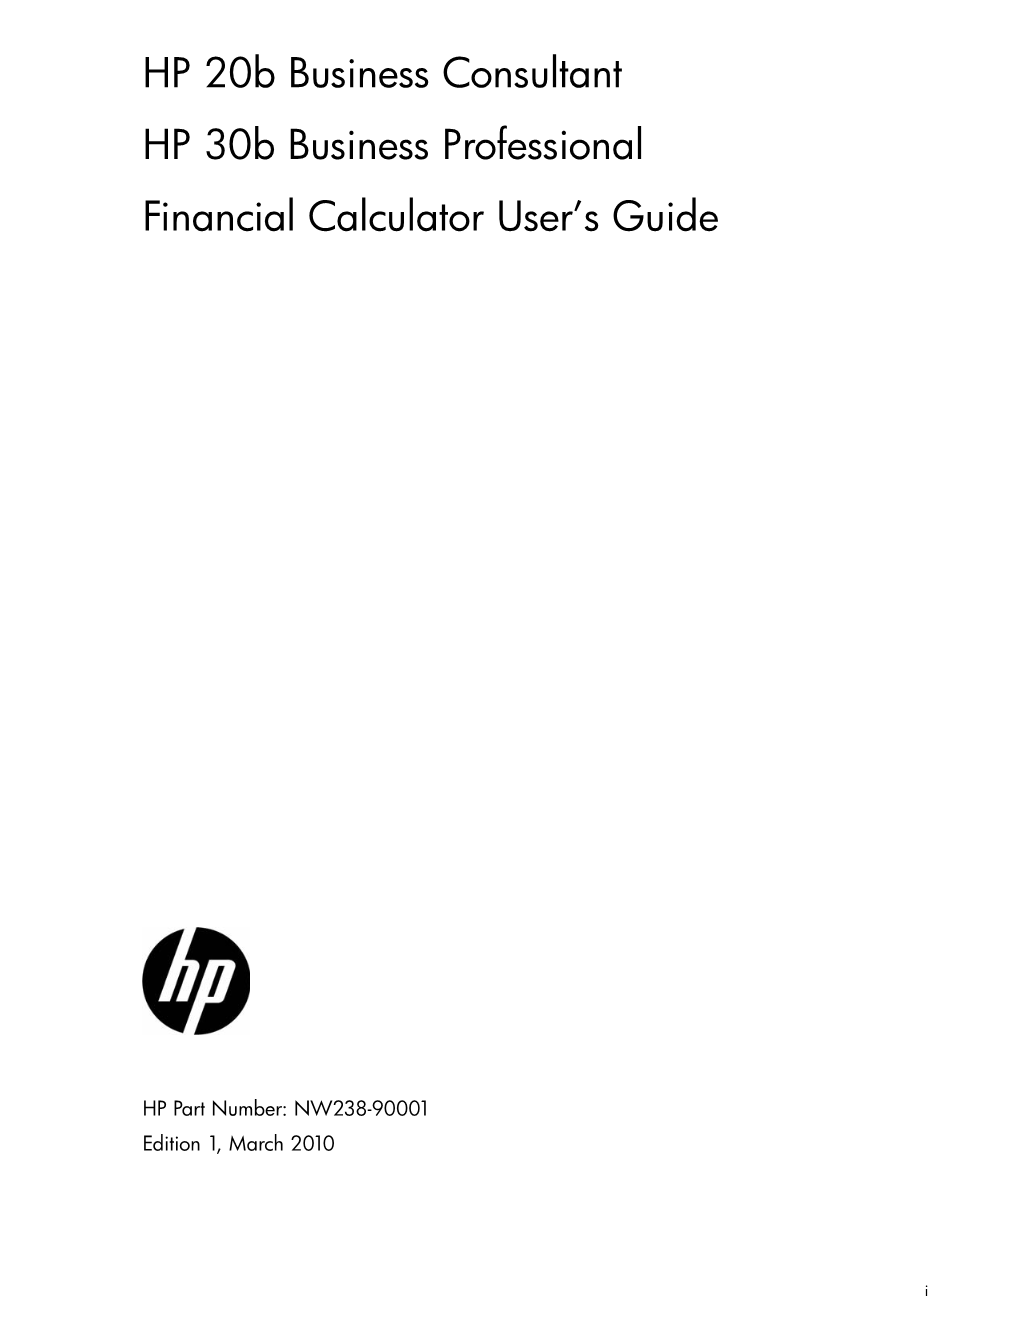 HP 20B Business Consultant HP 30B Business Professional Financial Calculator User’S Guide